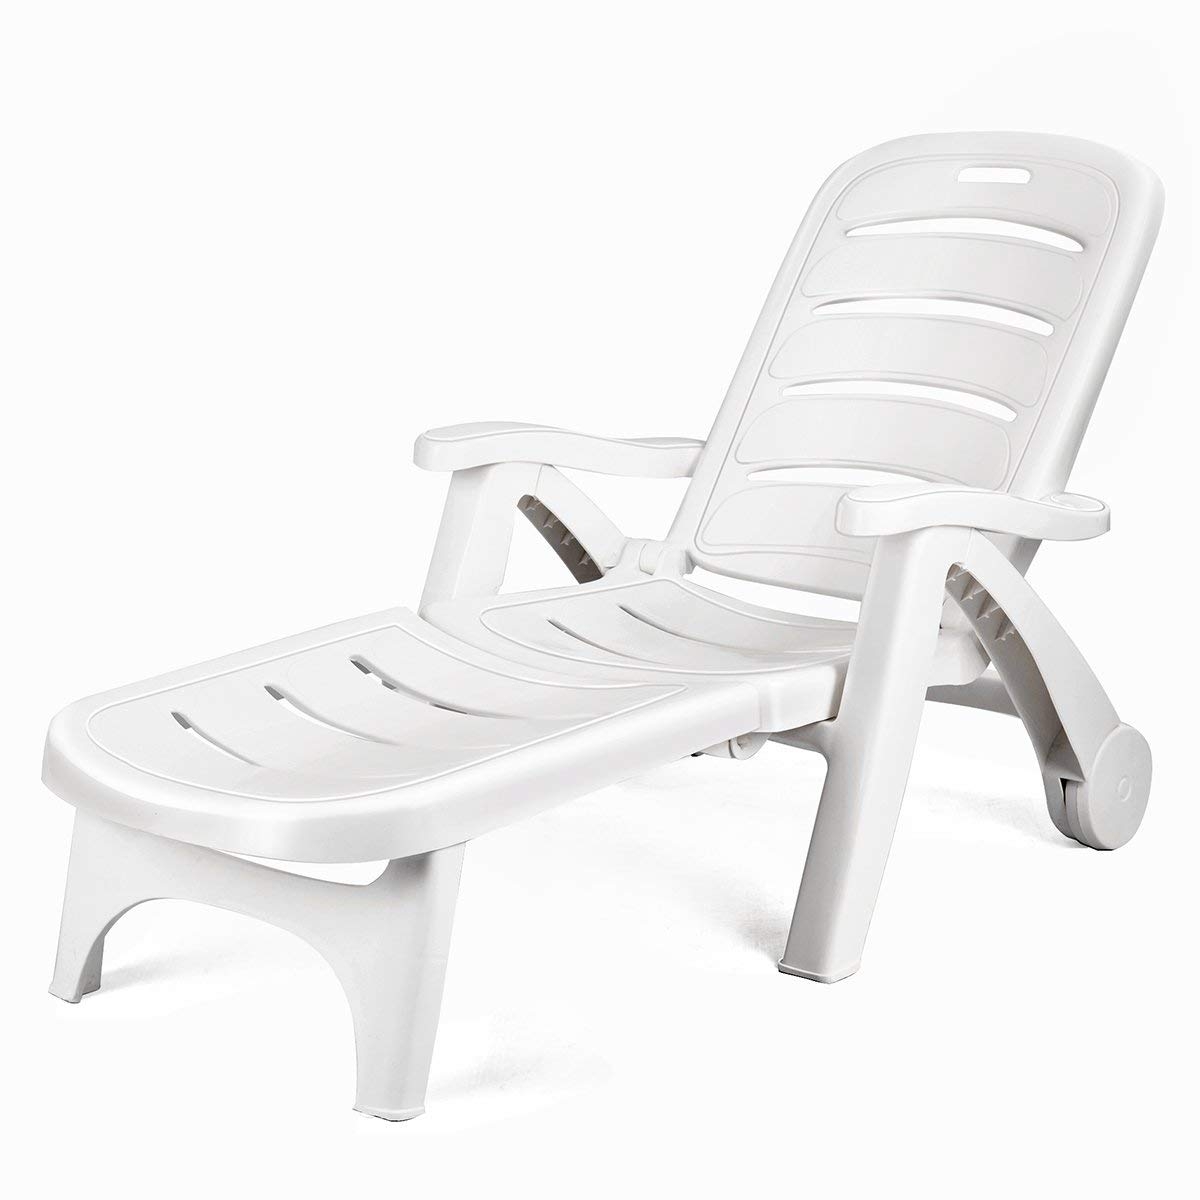 White Plastic Patio Chairs Youll Love In 2021 Visualhunt